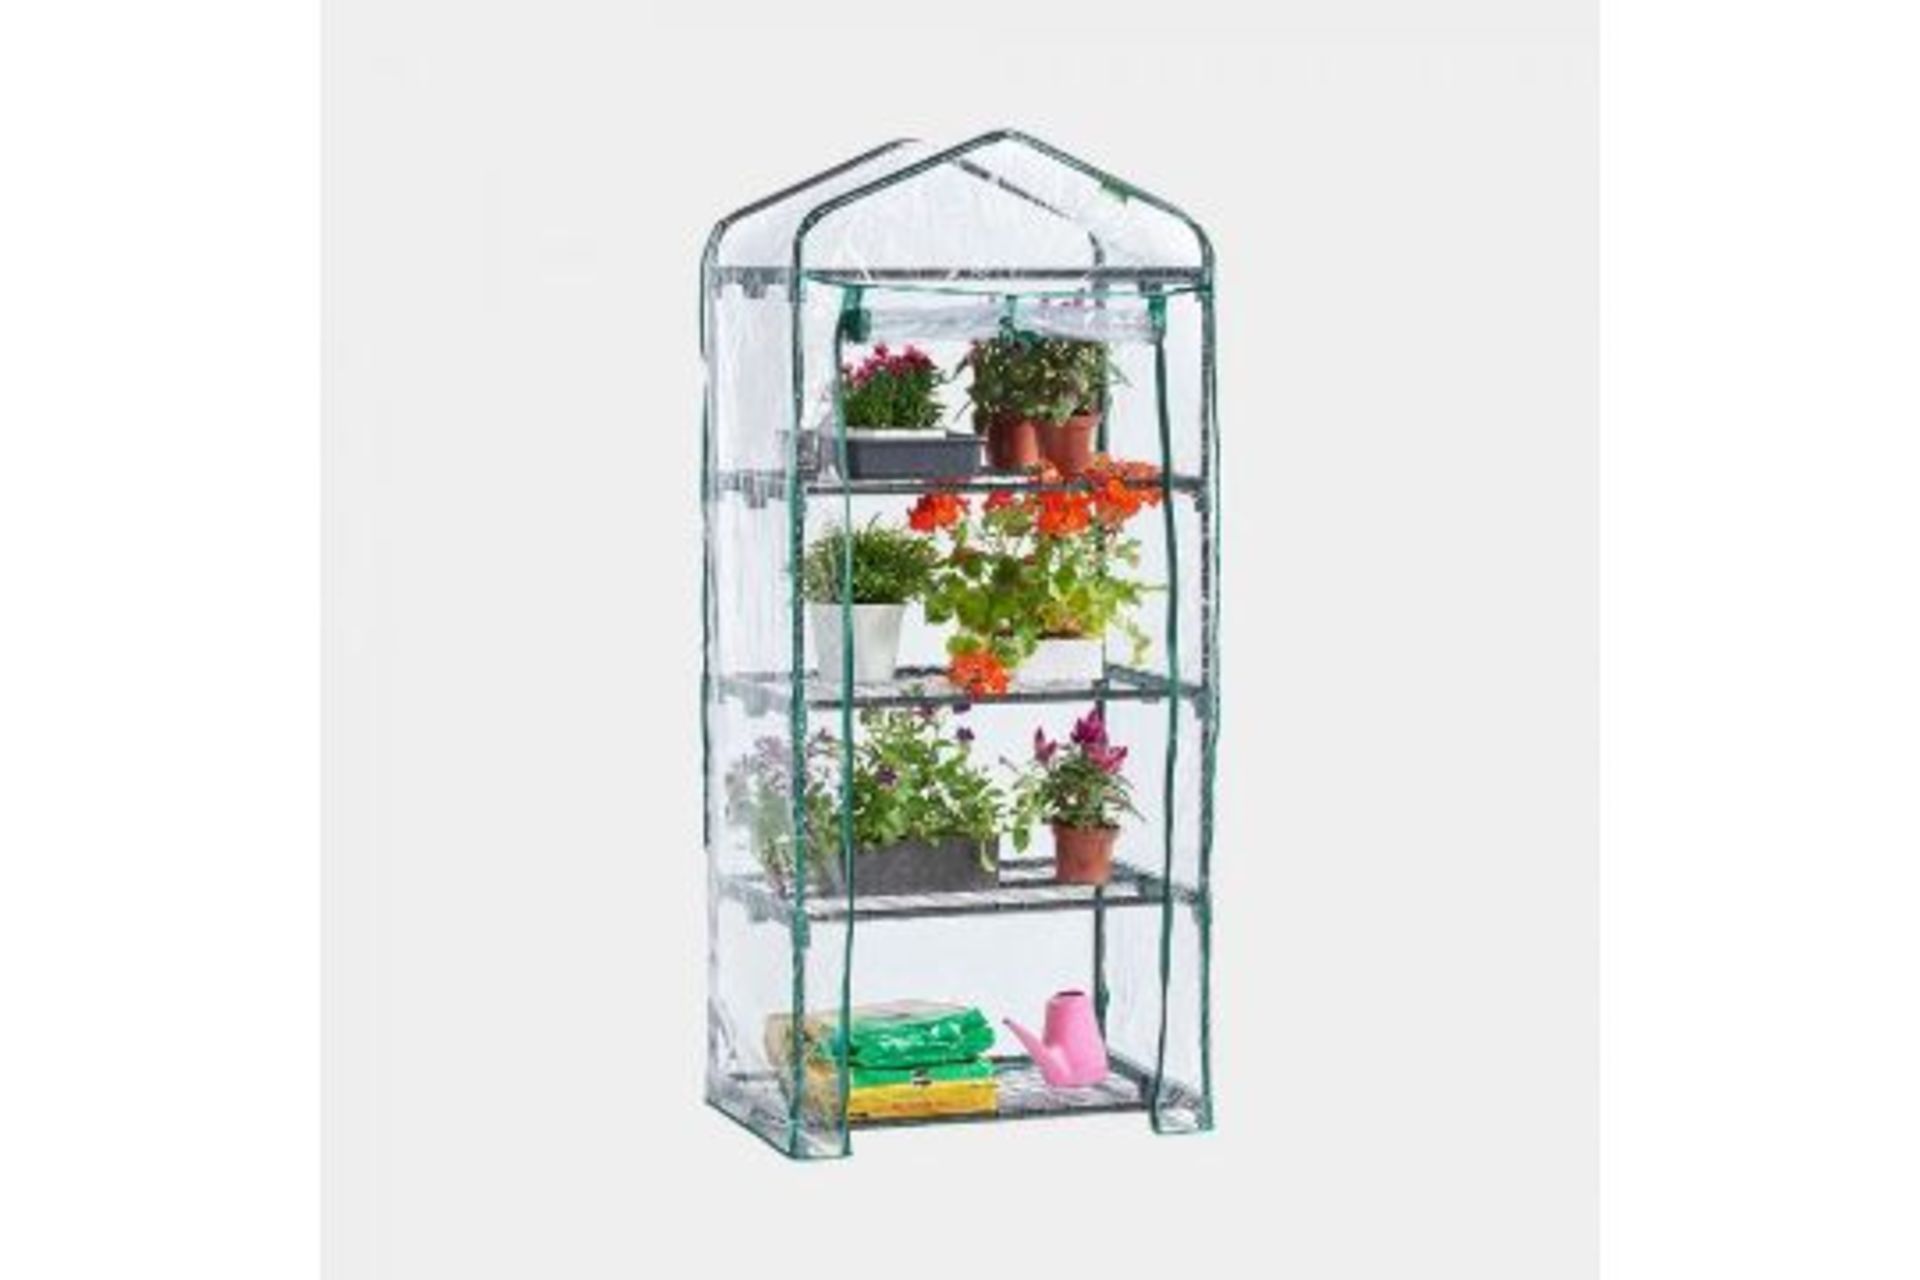 4 Tier Mini Greenhouse. Nurture your plants, vegetables, flowers and greenery by creating the